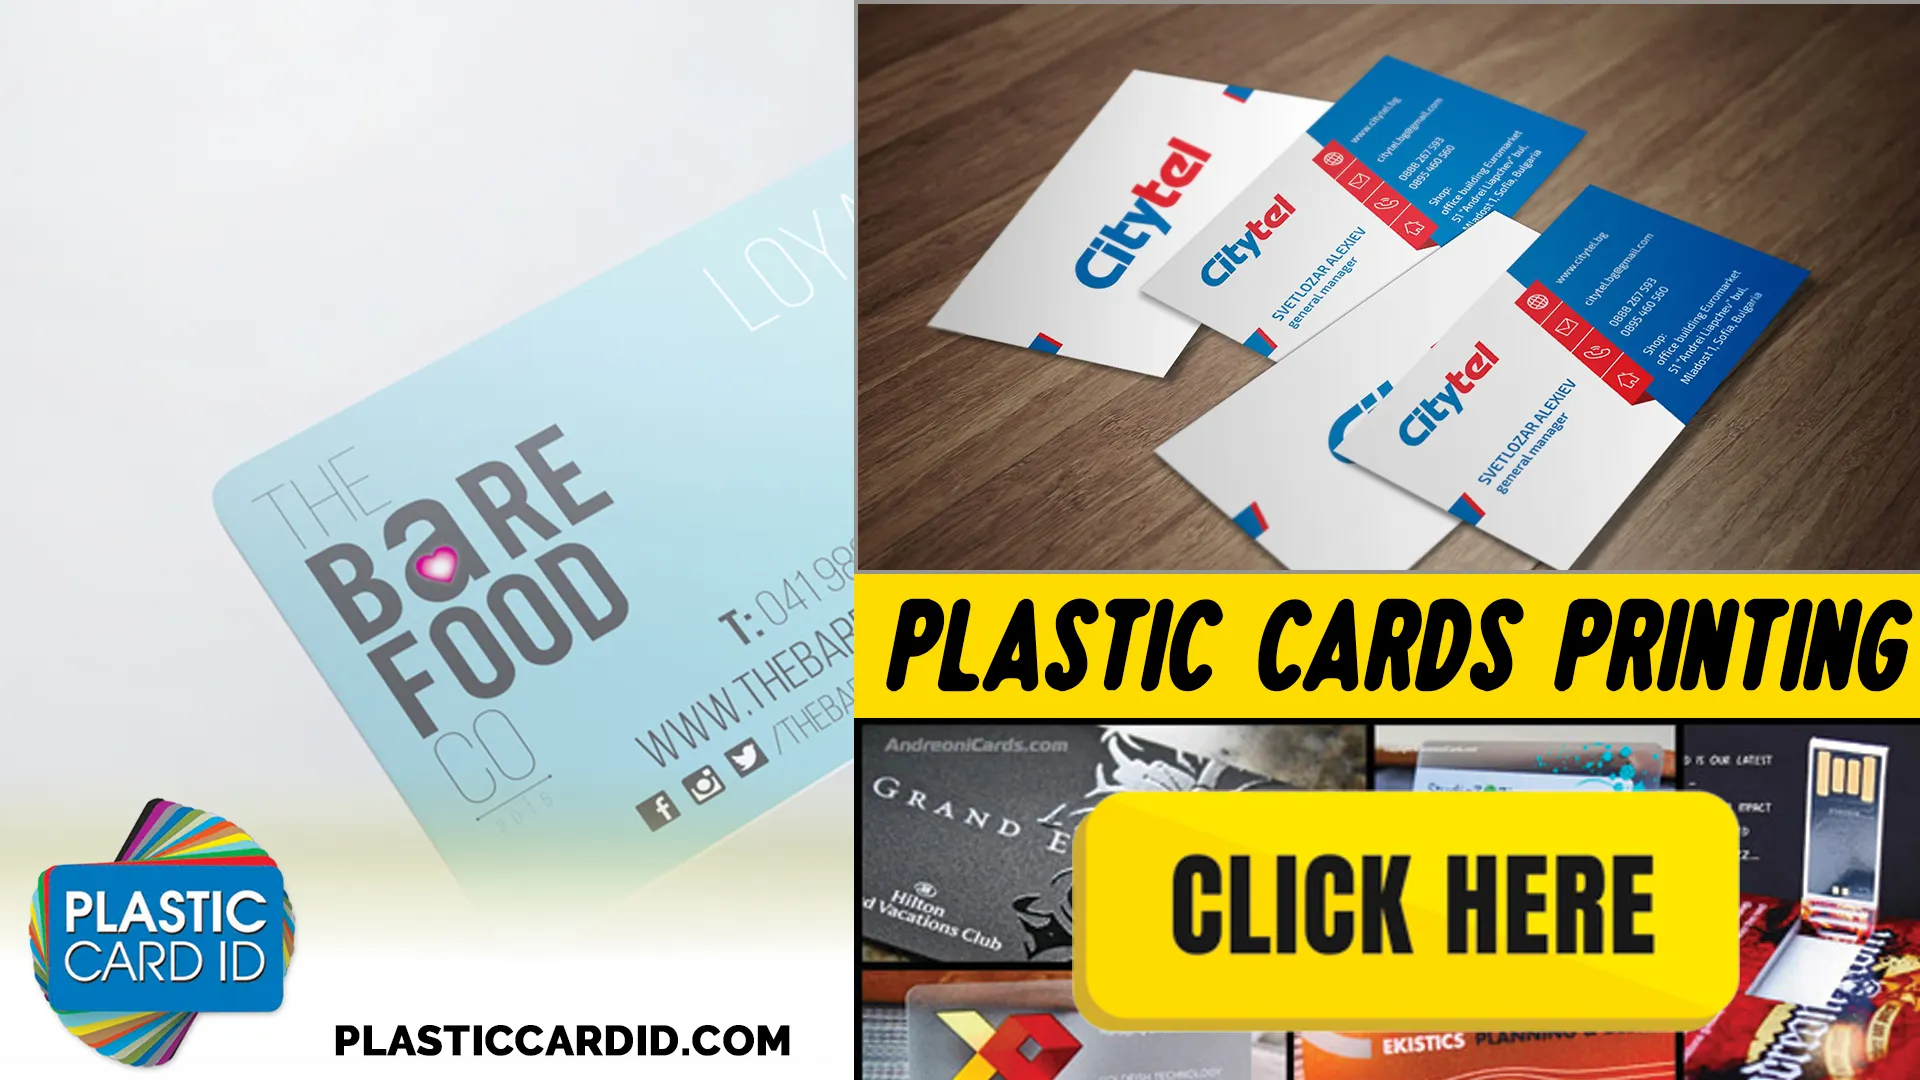 Why Plastic Card ID
 Has the Best Customer Loyalty Cards